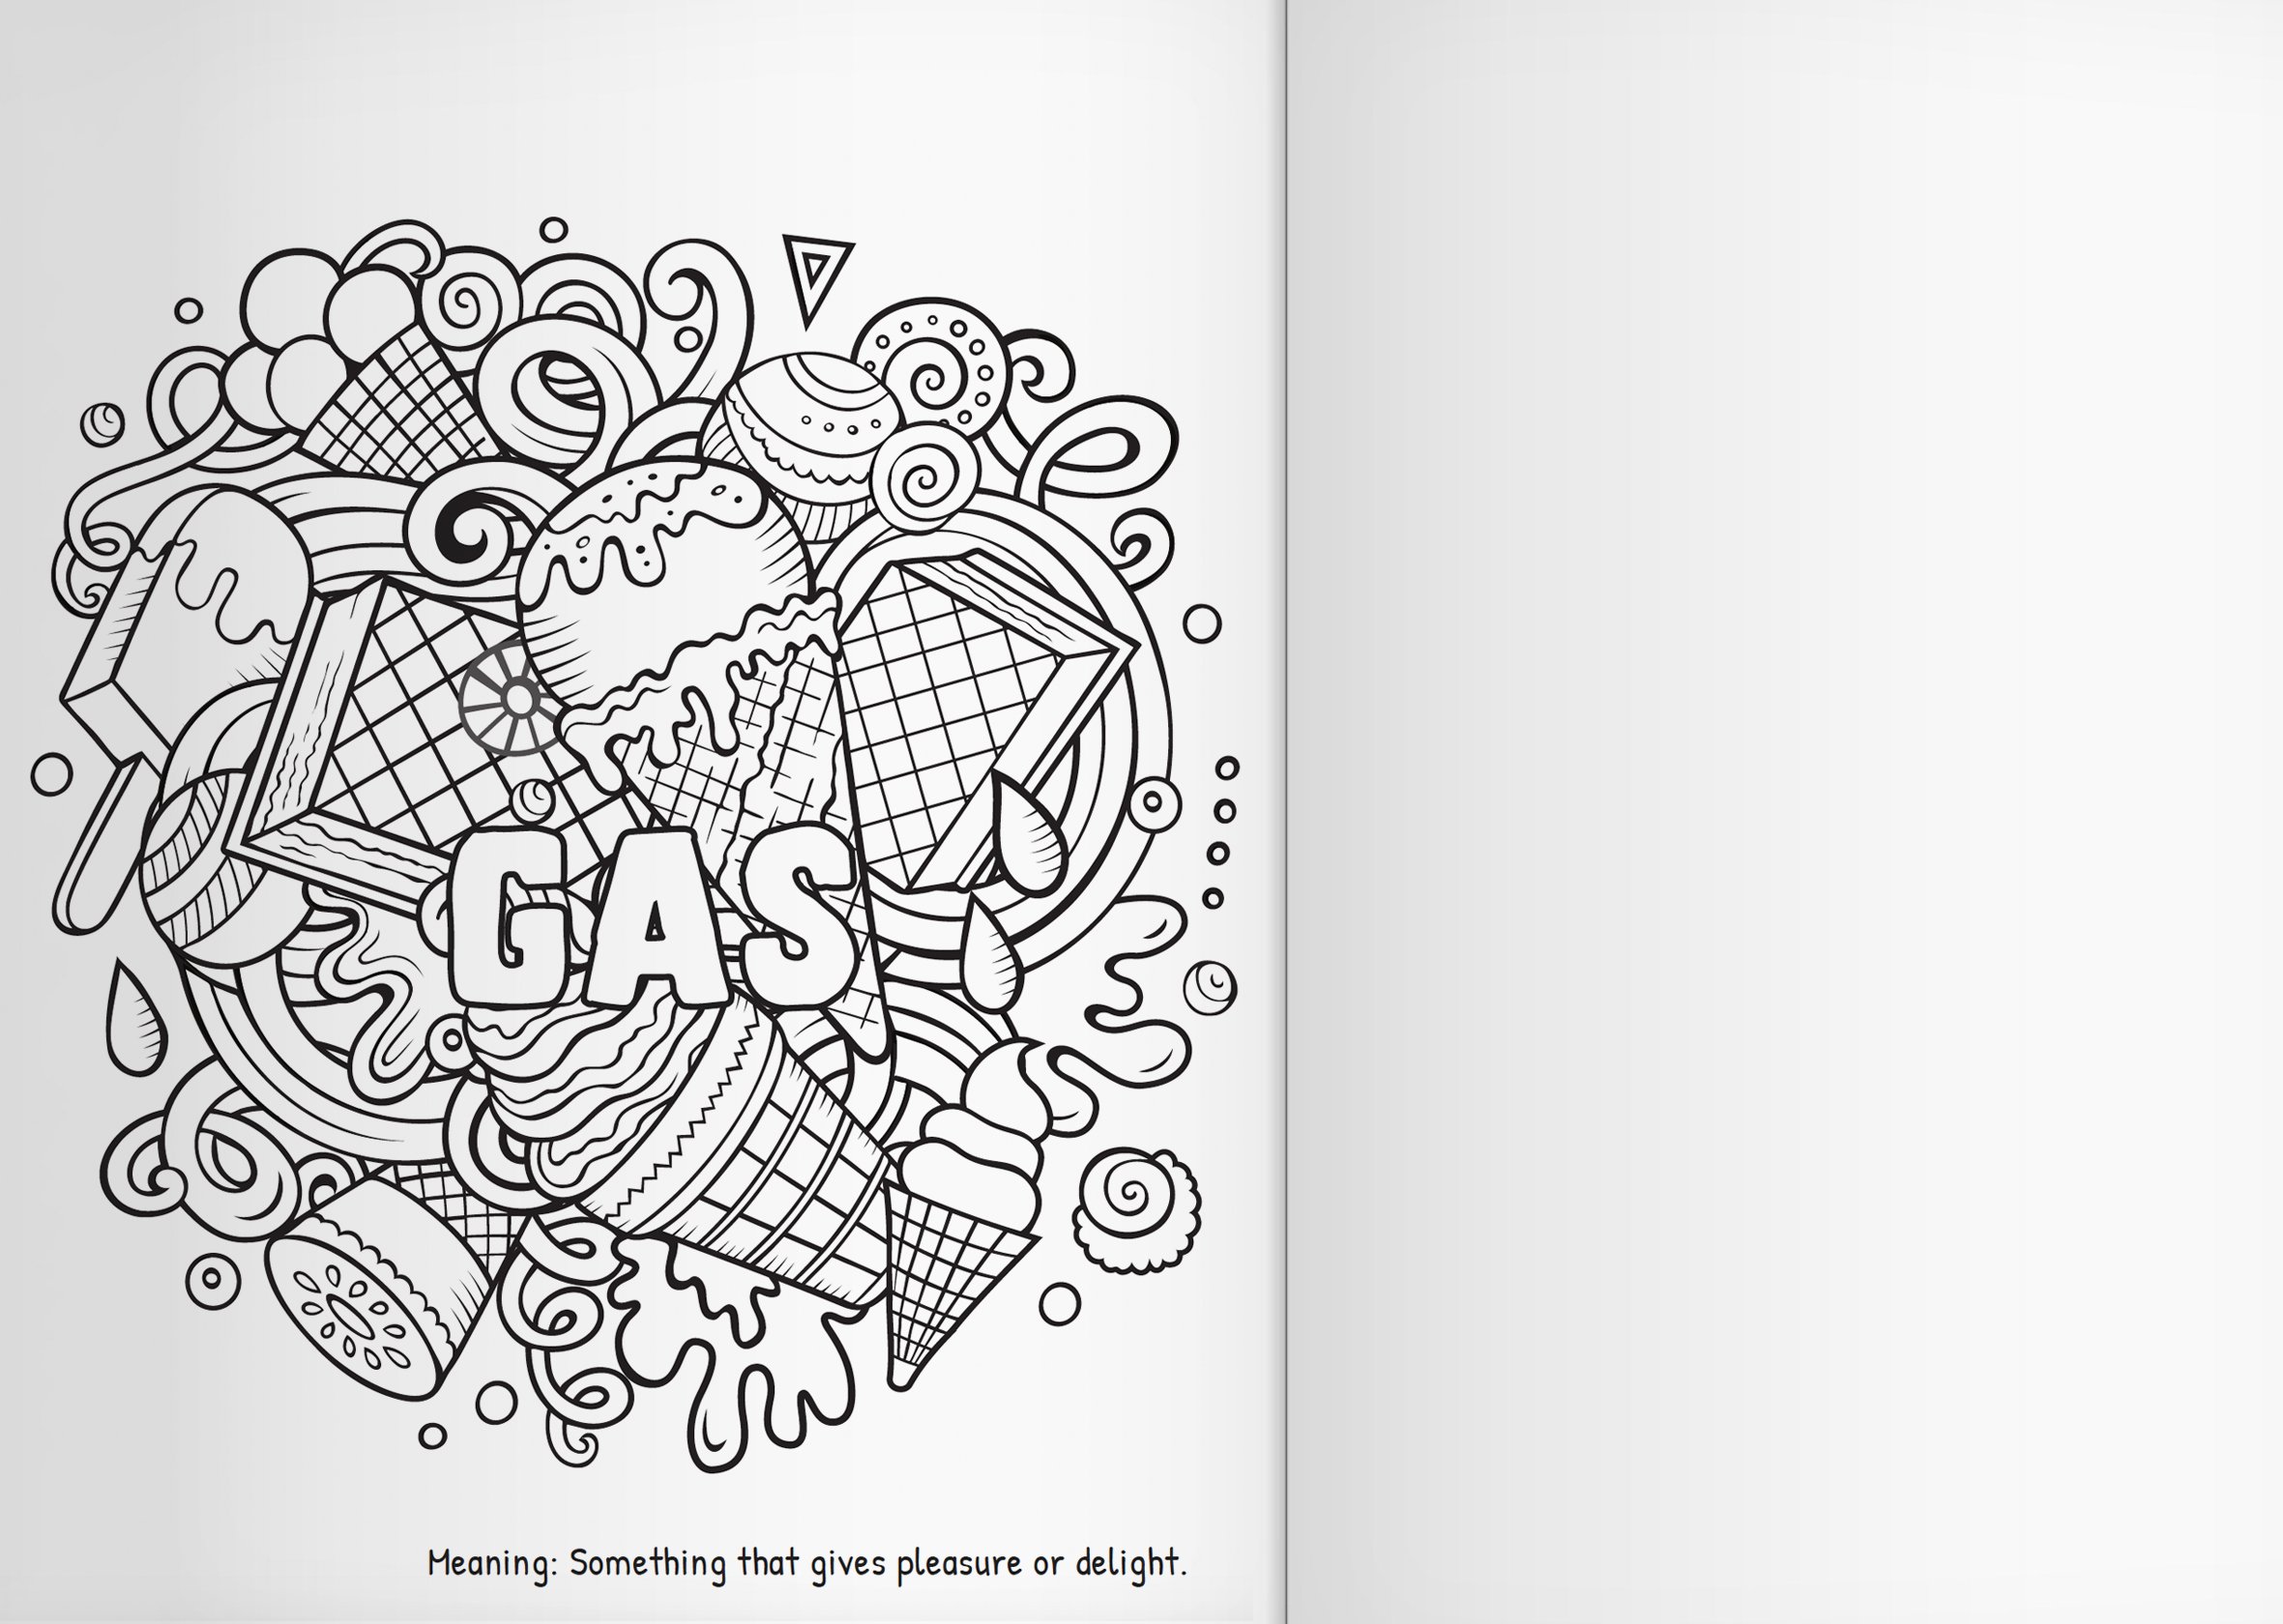 Gosh Dang It! Clean Swear Word Coloring Book for Adults and Teens: Fun Safe  Swearing and Stress Relief!